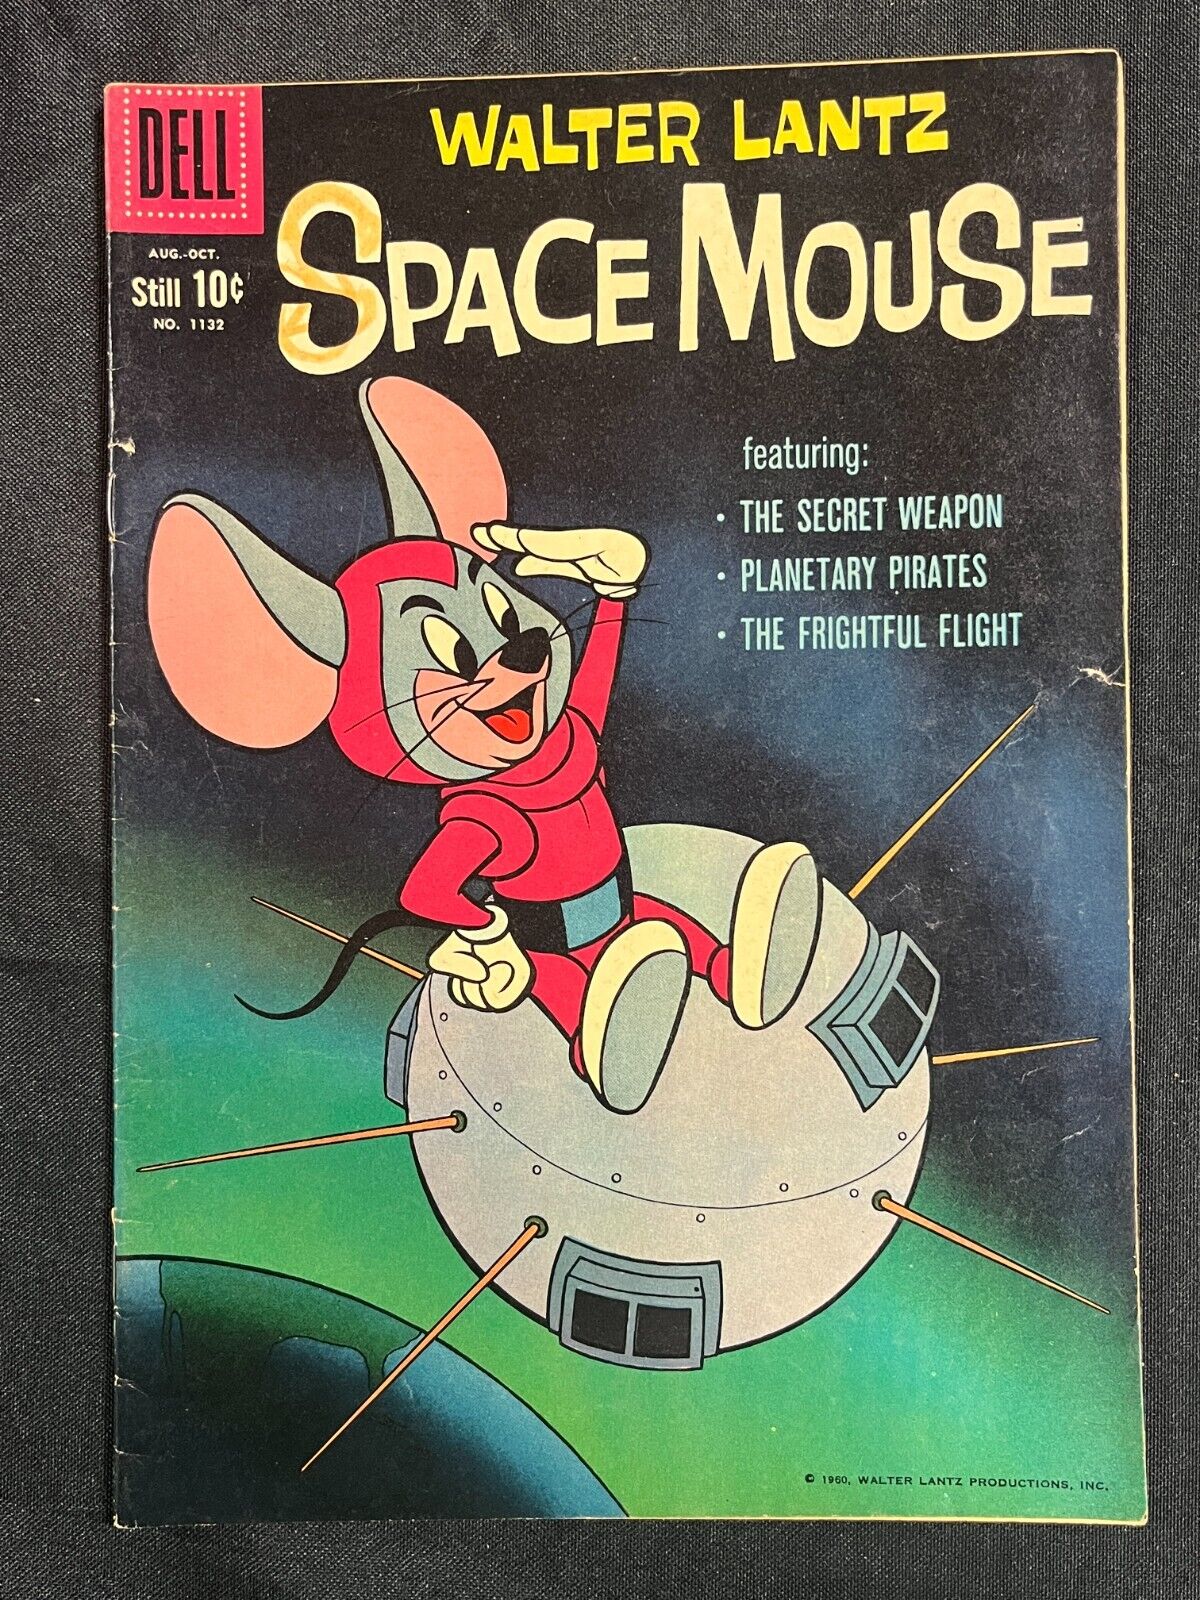 1960 Aug-Oct NO 1132 Dell Comic Book Walter Lantz Space Mouse 10 Cents KB 62323